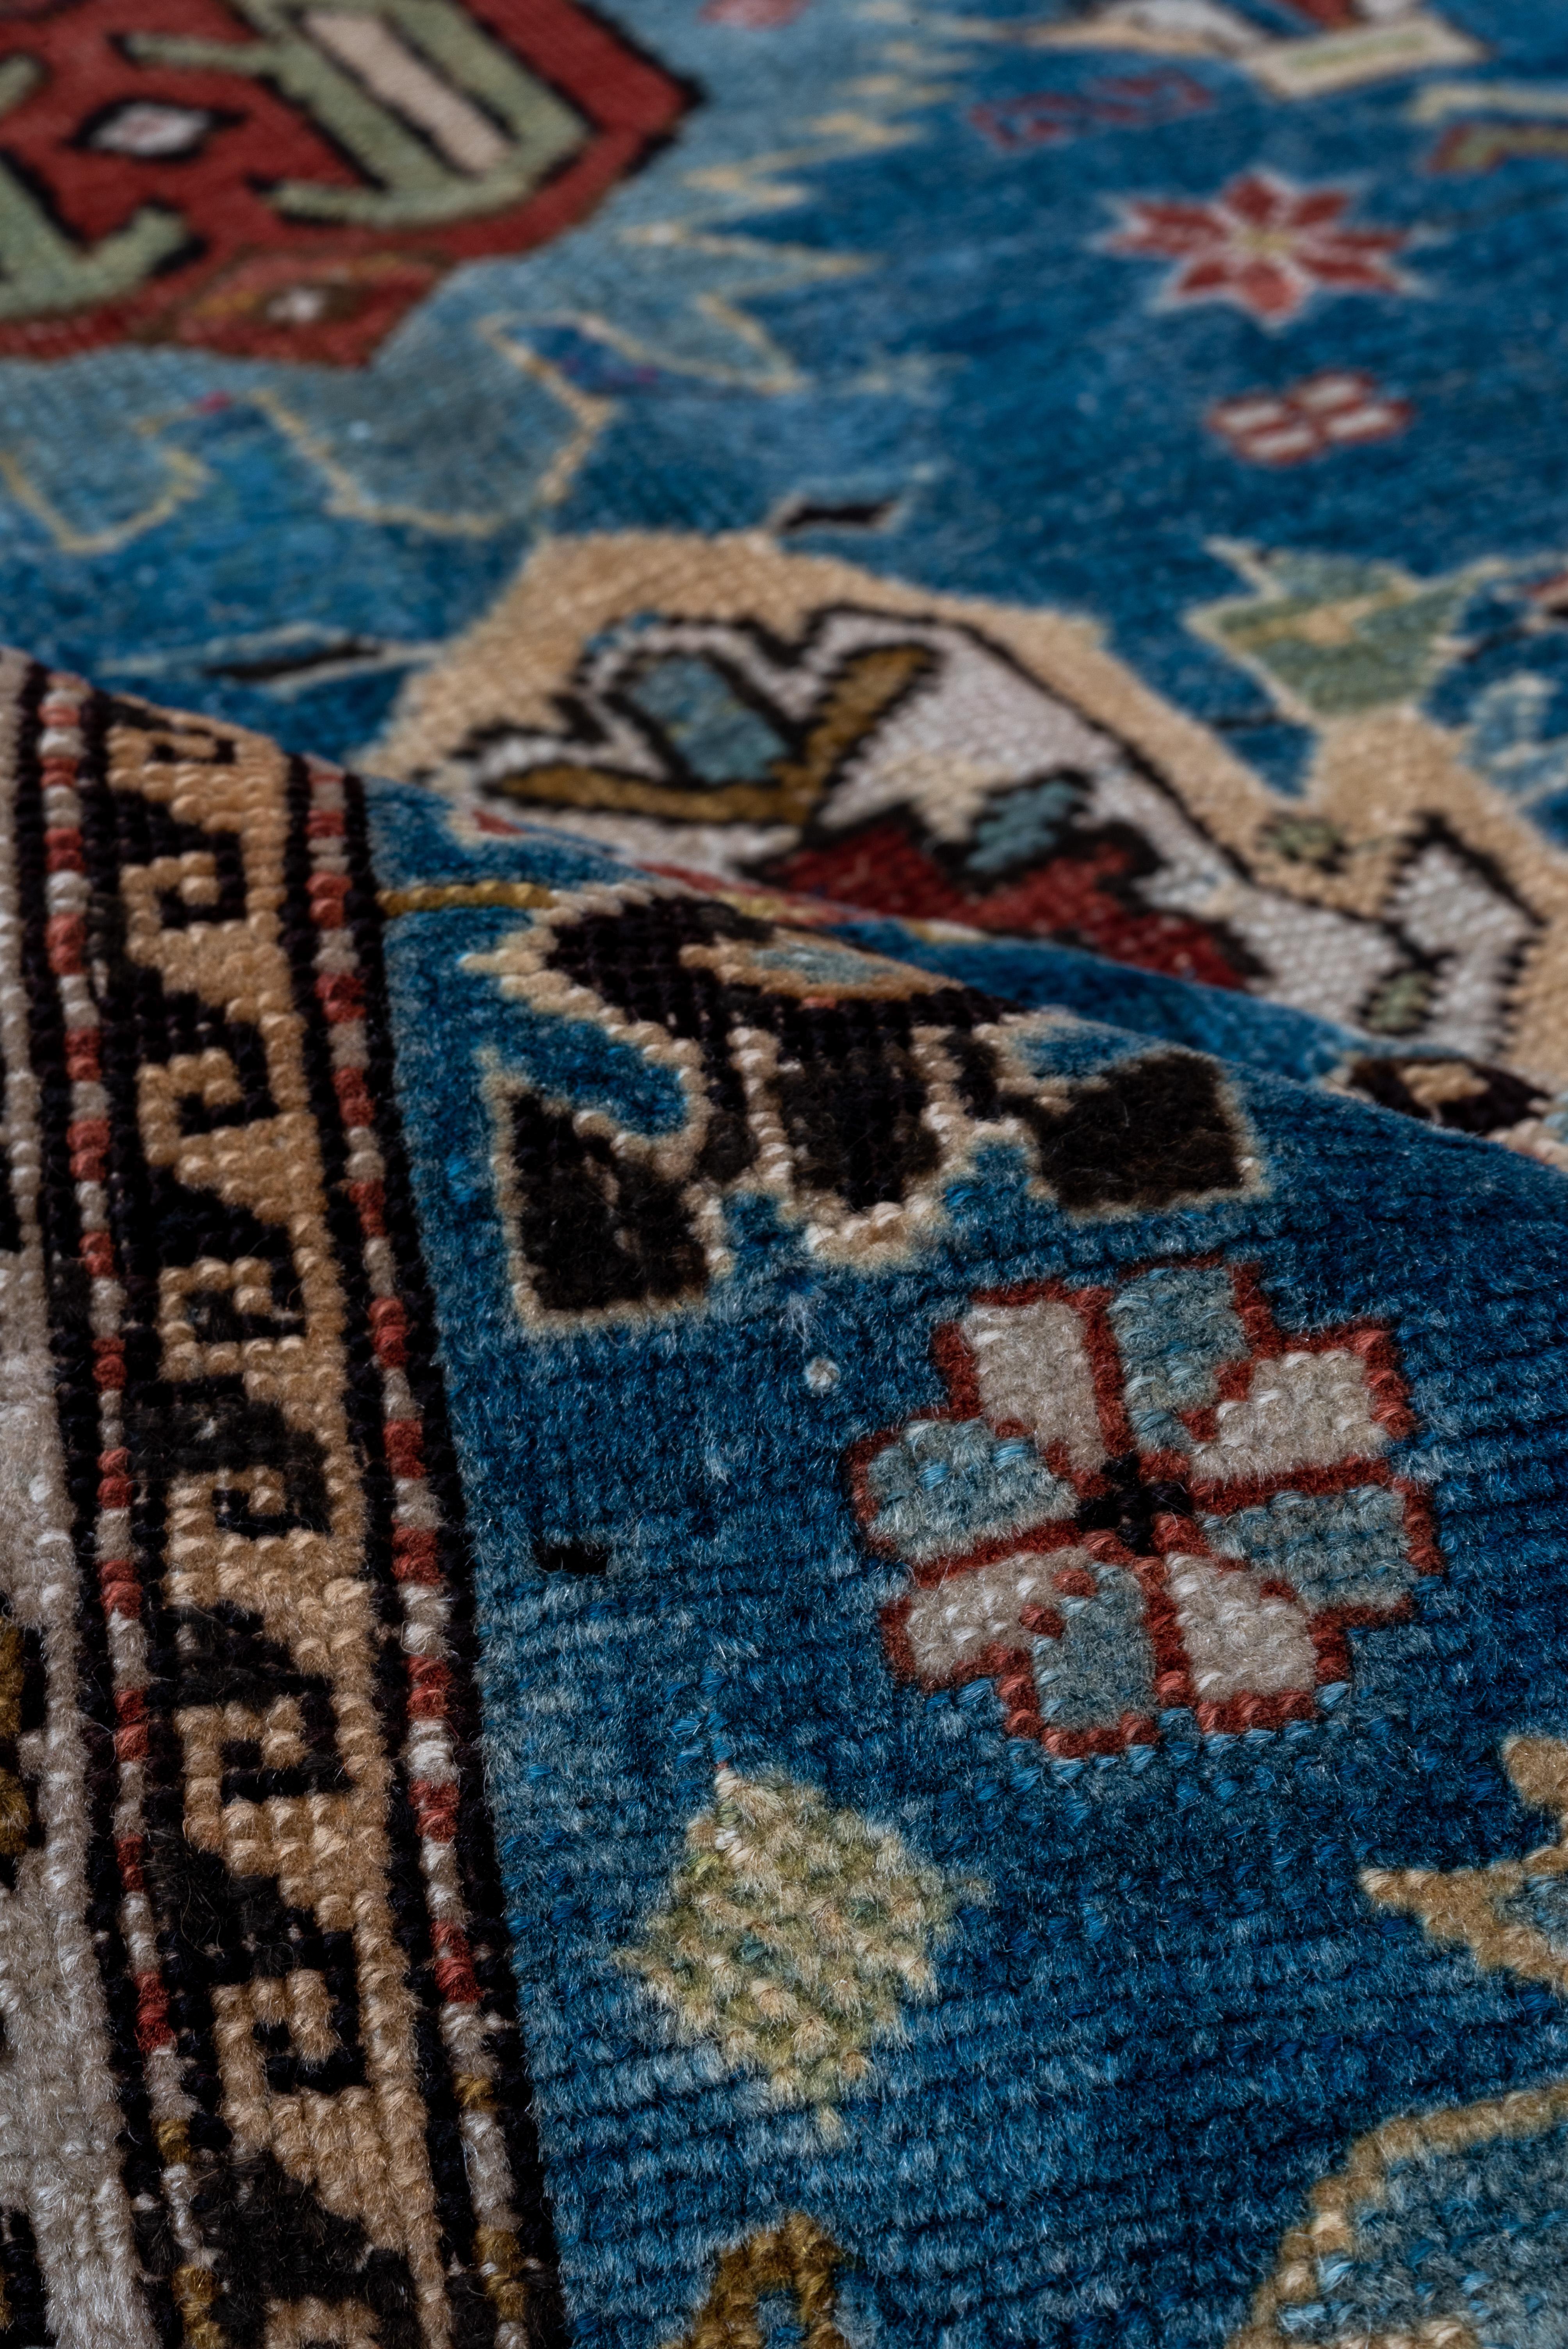 This extremely finely knotted East Caucasian scatter shows a luminous sapphire blue field with a broken three column design of sky blue palmettes, and teal, red coral and ecru details. Various rosettes and abstract flowers actively fill the field.